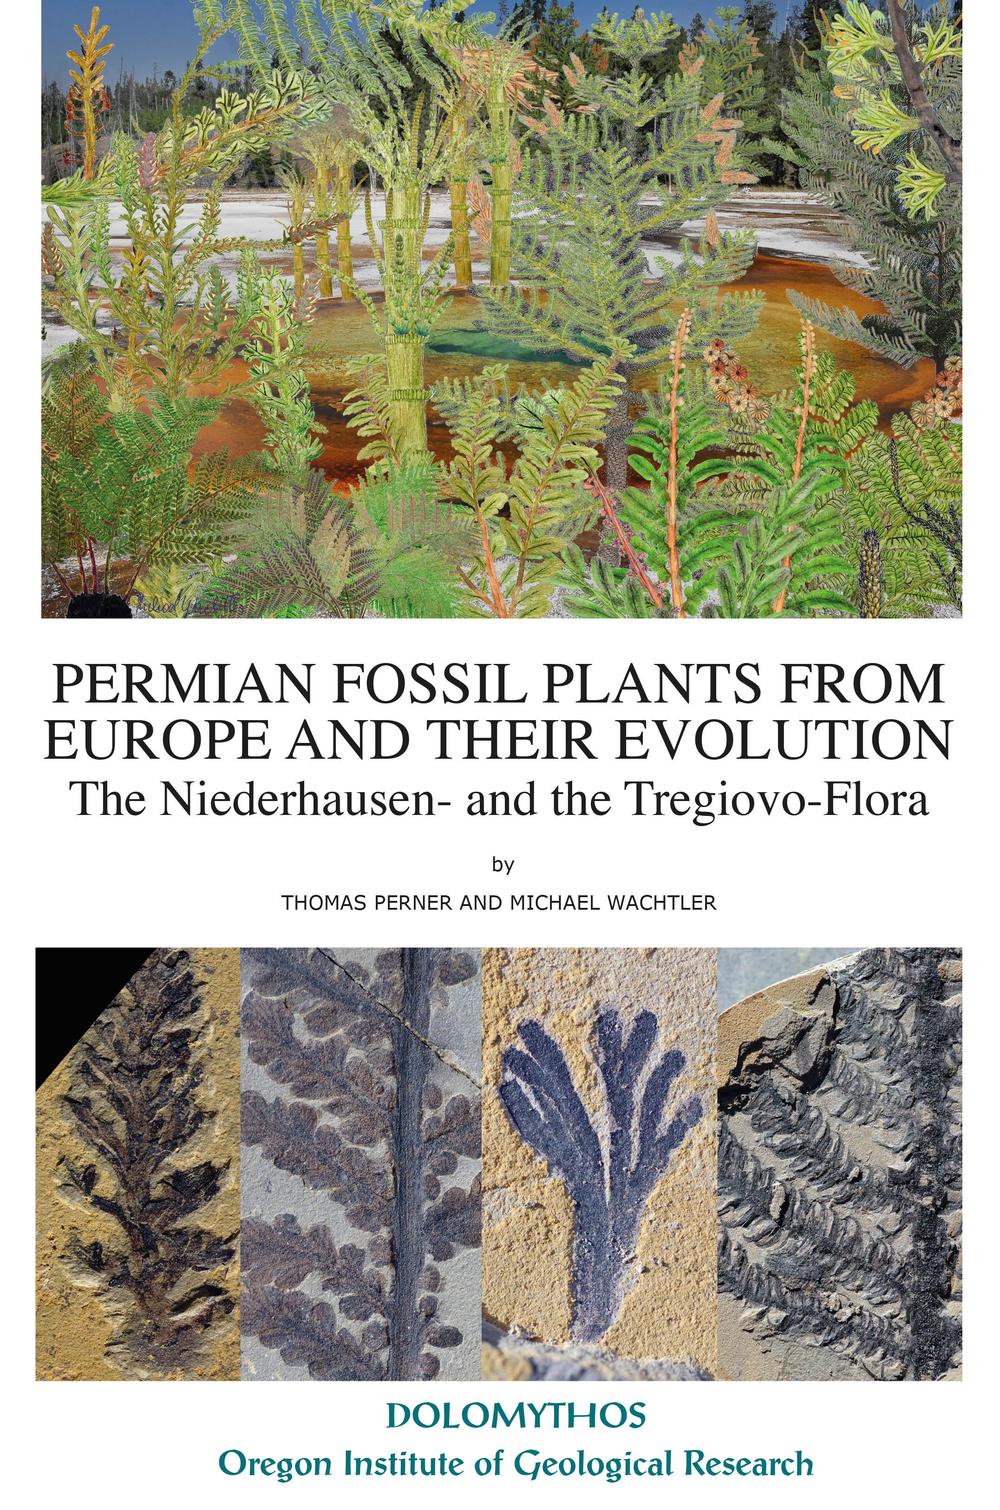 Permain fossil plants from Europe and their evolution. The Niederhausen- and the Tregiovo-Flora